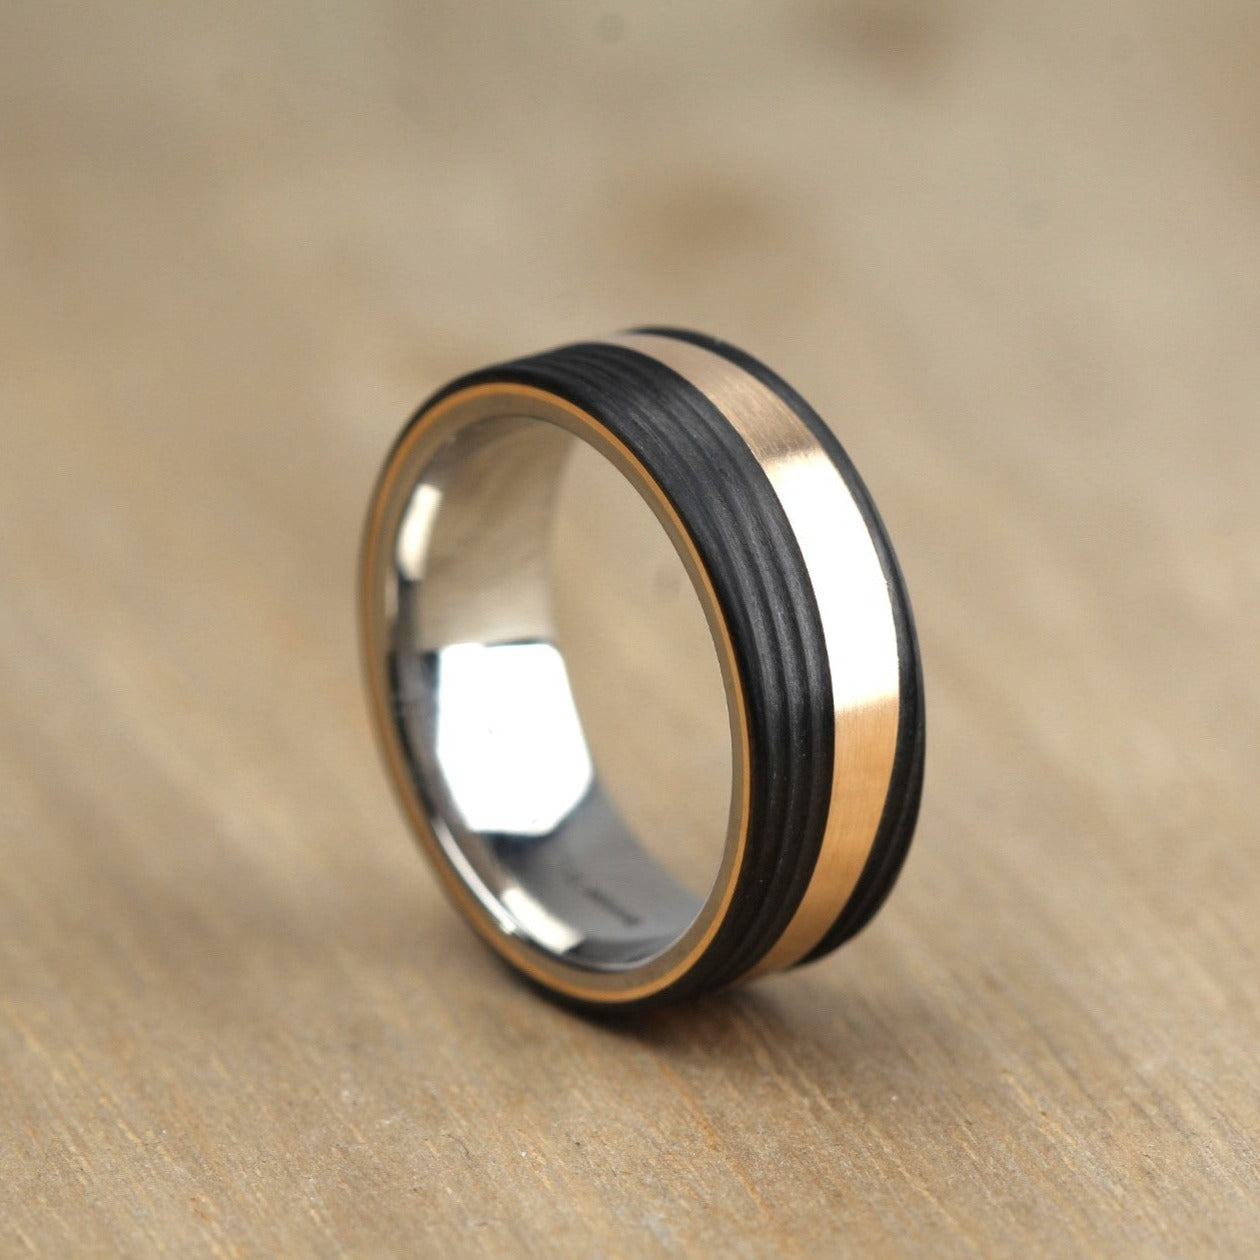 Carbon fibre and Bronze wedding ring band. black mans ring. black mans wedding ring band uk 8mm